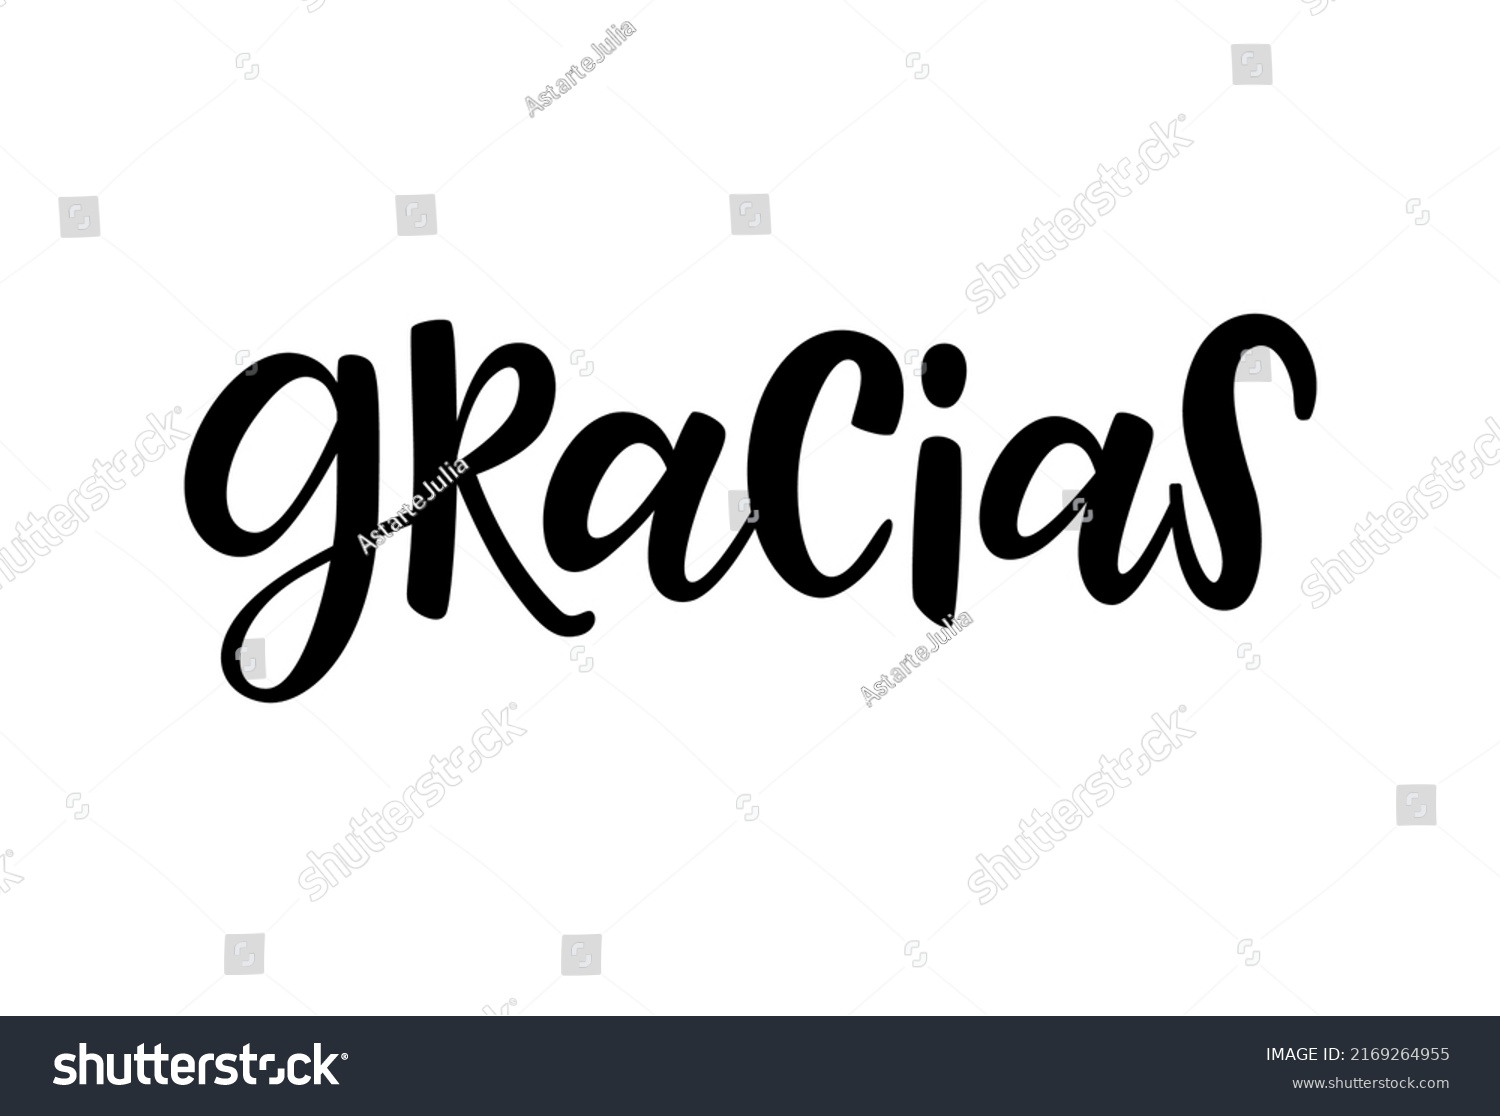 Gracias Calligraphy Spain Text Hand Lettering Stock Vector (Royalty ...